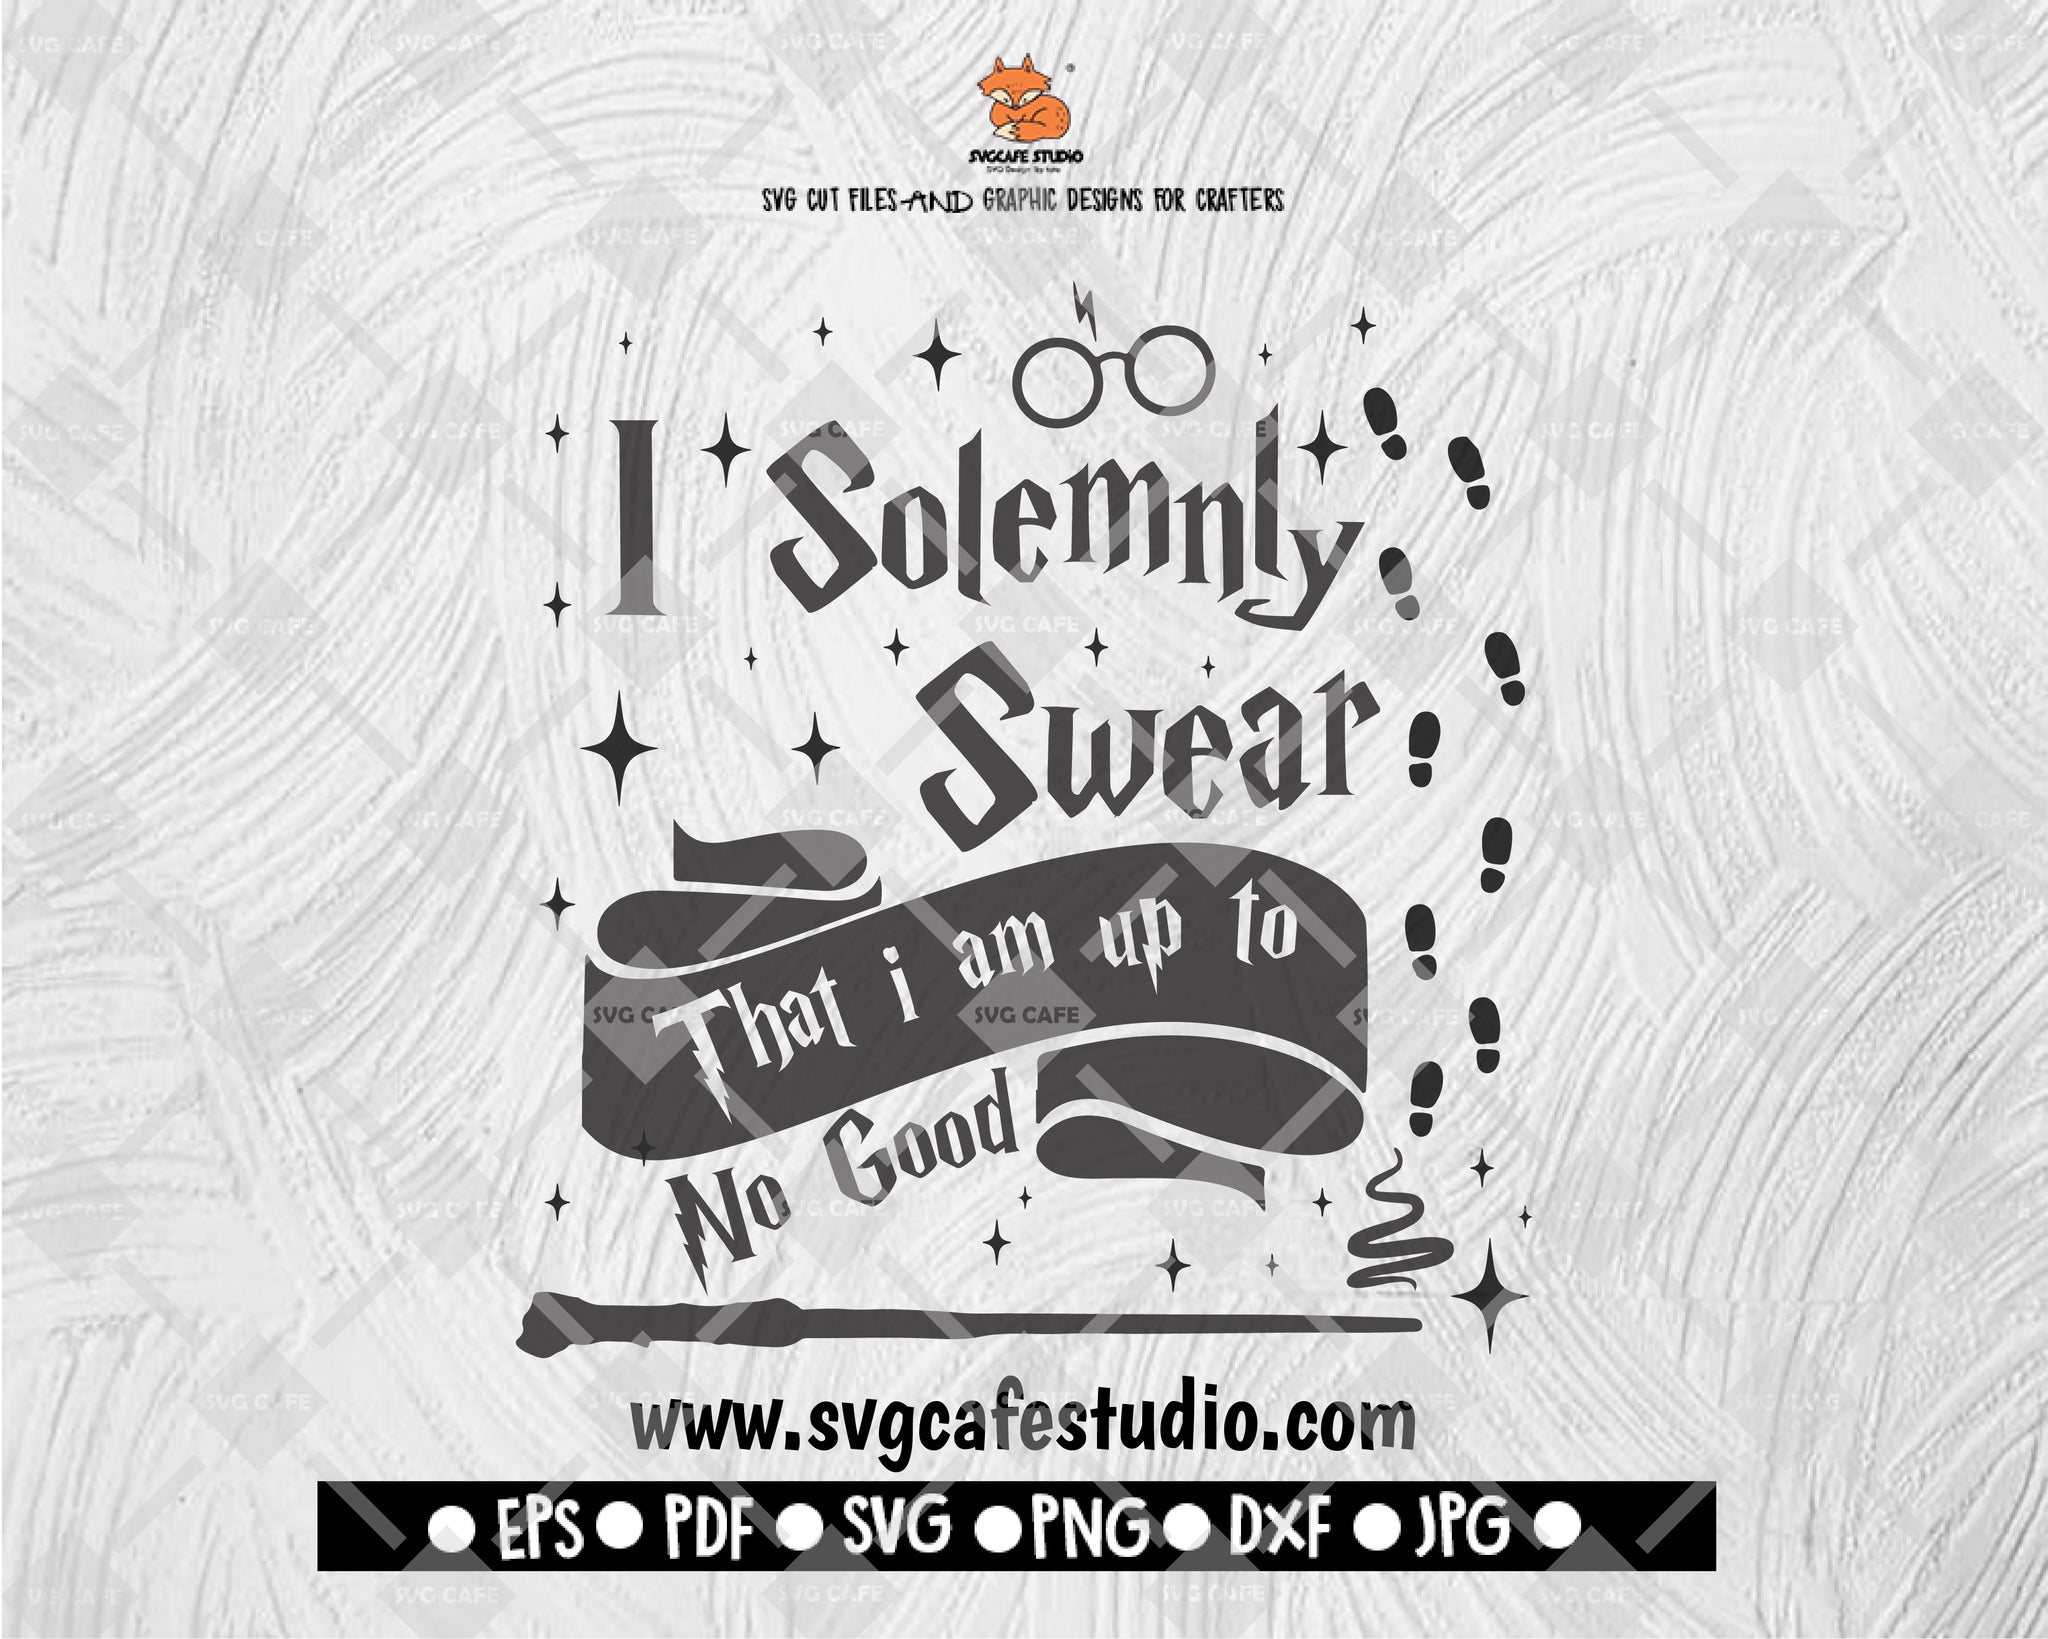 I Solemnly Swear that I Am Up to No Good Harry Potter Inspired SVG and DXF EPS Cut File • Cricut • Silhouette